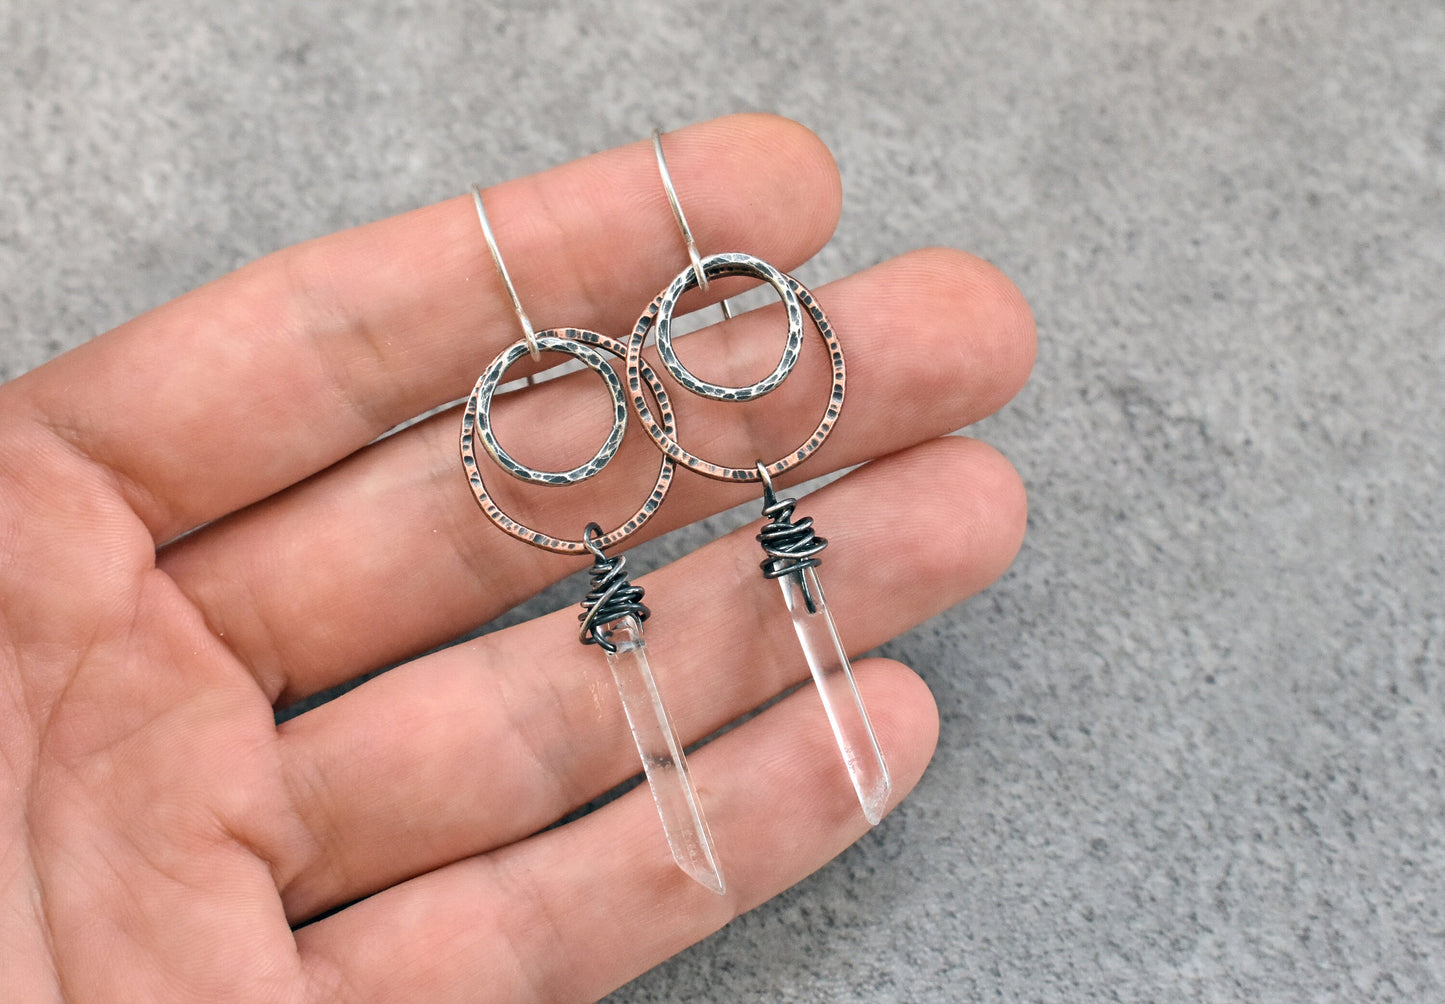 Quartz Crystal Point Earrings, Rustic Copper Circle Dangles, Mixed Metal Jewelry, Natural Raw Stone, Sterling Silver